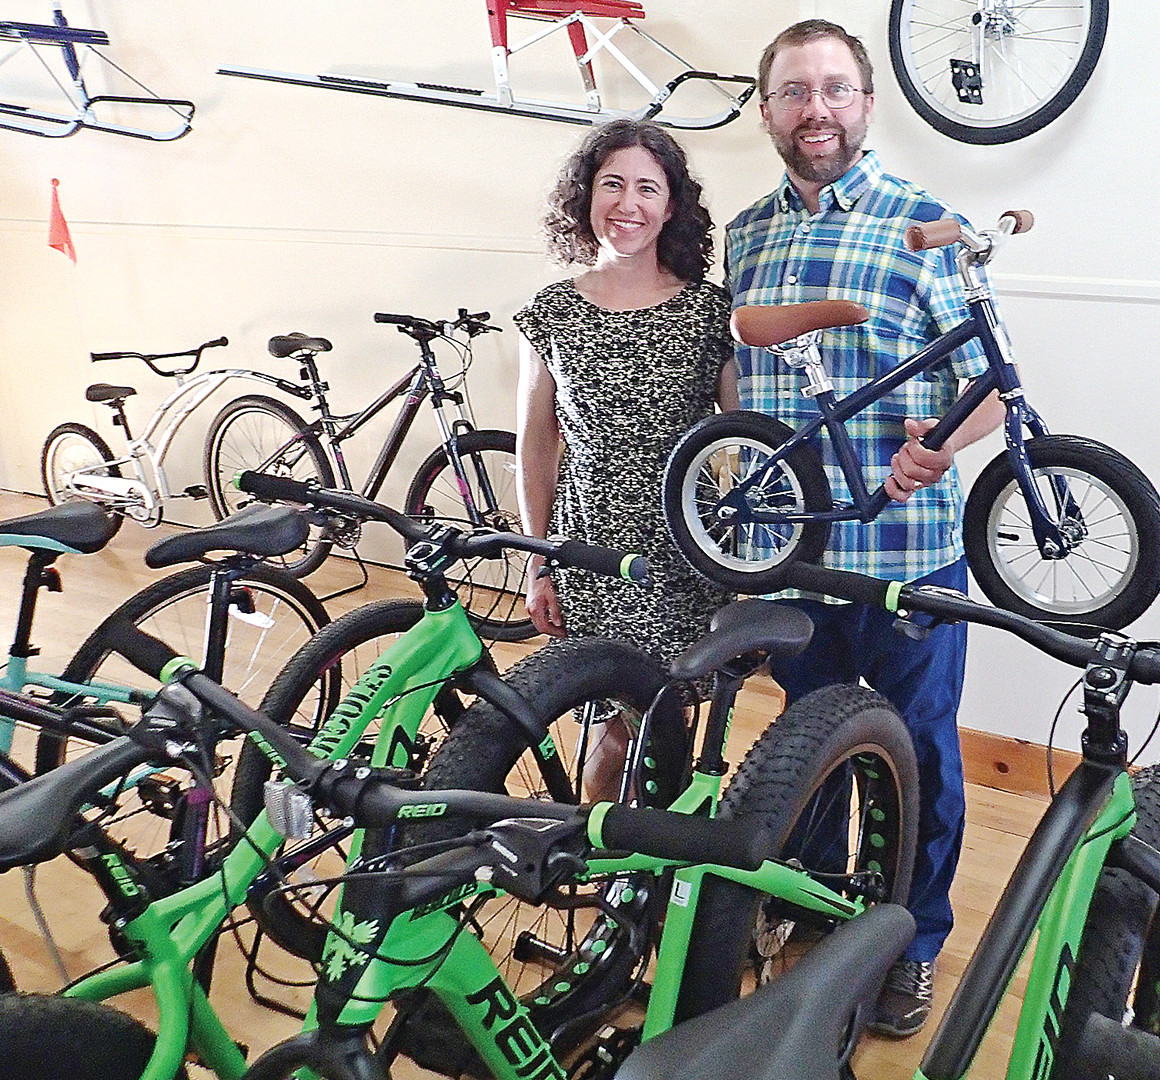 Bike shop returns to Ely; Kicksleds also available | The Timberjay